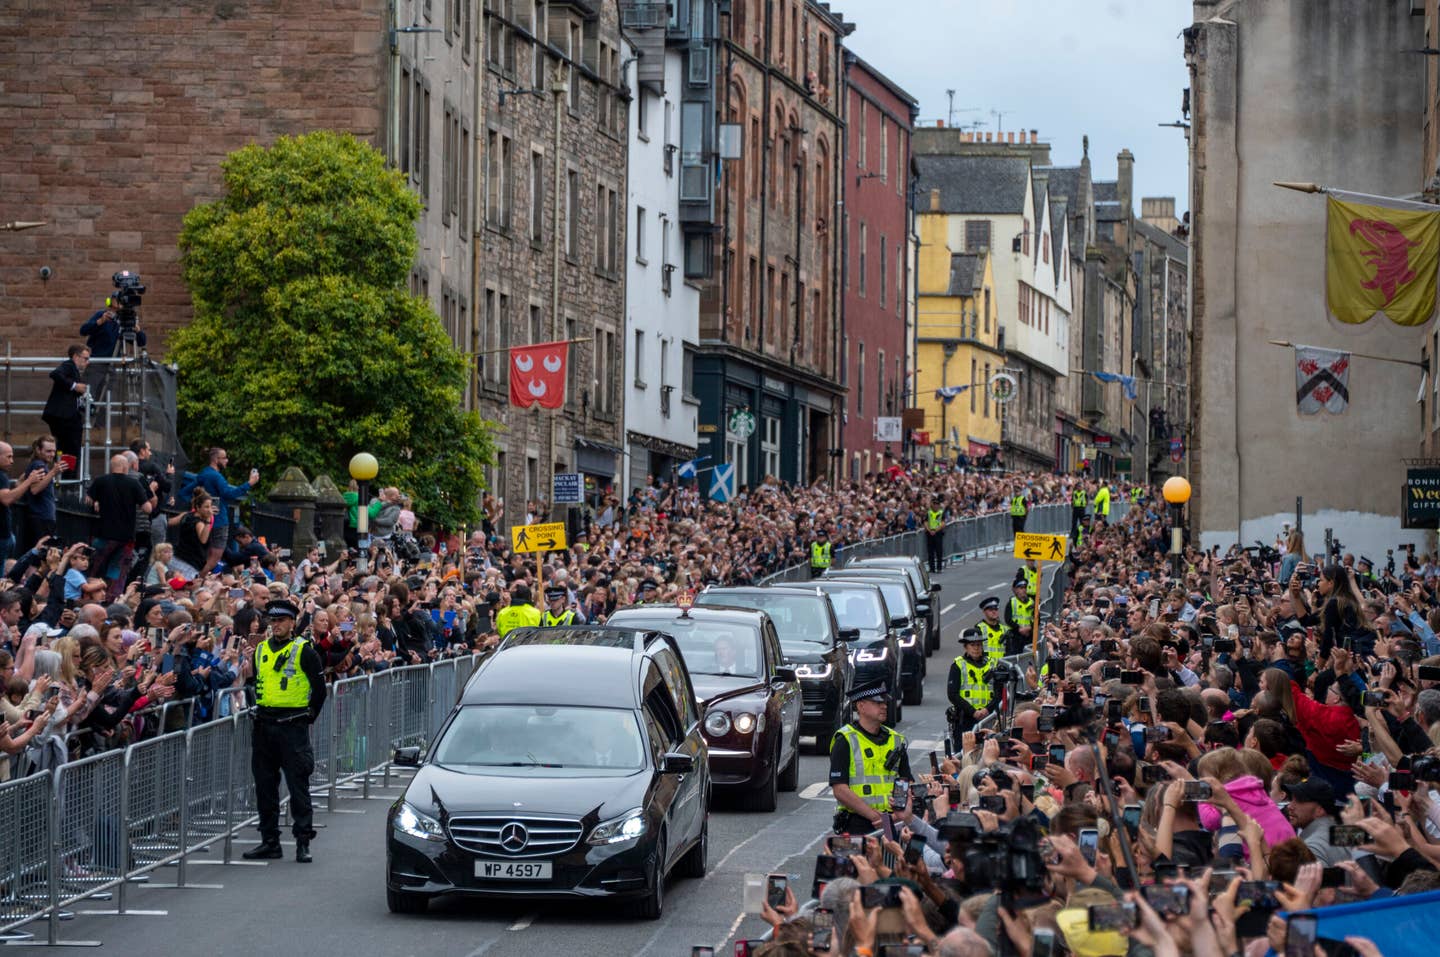 EDINBURGH, SCOTLAND - SEPTEMBER 11:  People gather in tribute as the cortege with the hearse carrying the coffin of the late Queen Elizabeth II, draped with the Royal Standard of Scotland, passes down the Royal Mile, Edinburgh, on the journey from Balmoral to the Palace of Holyroodhouse on September 11, 2022 in Edinburgh, United Kingdom. Elizabeth Alexandra Mary Windsor was born in Bruton Street, Mayfair, London on 21 April 1926. She married Prince Philip in 1947 and ascended the throne of the United Kingdom and Commonwealth on 6 February 1952 after the death of her Father, King George VI. Queen Elizabeth II died at Balmoral Castle in Scotland on September 8, 2022, and is succeeded by her eldest son, King Charles III.  (Photo by Andrew O'Brien/WPA Pool/Getty Images)